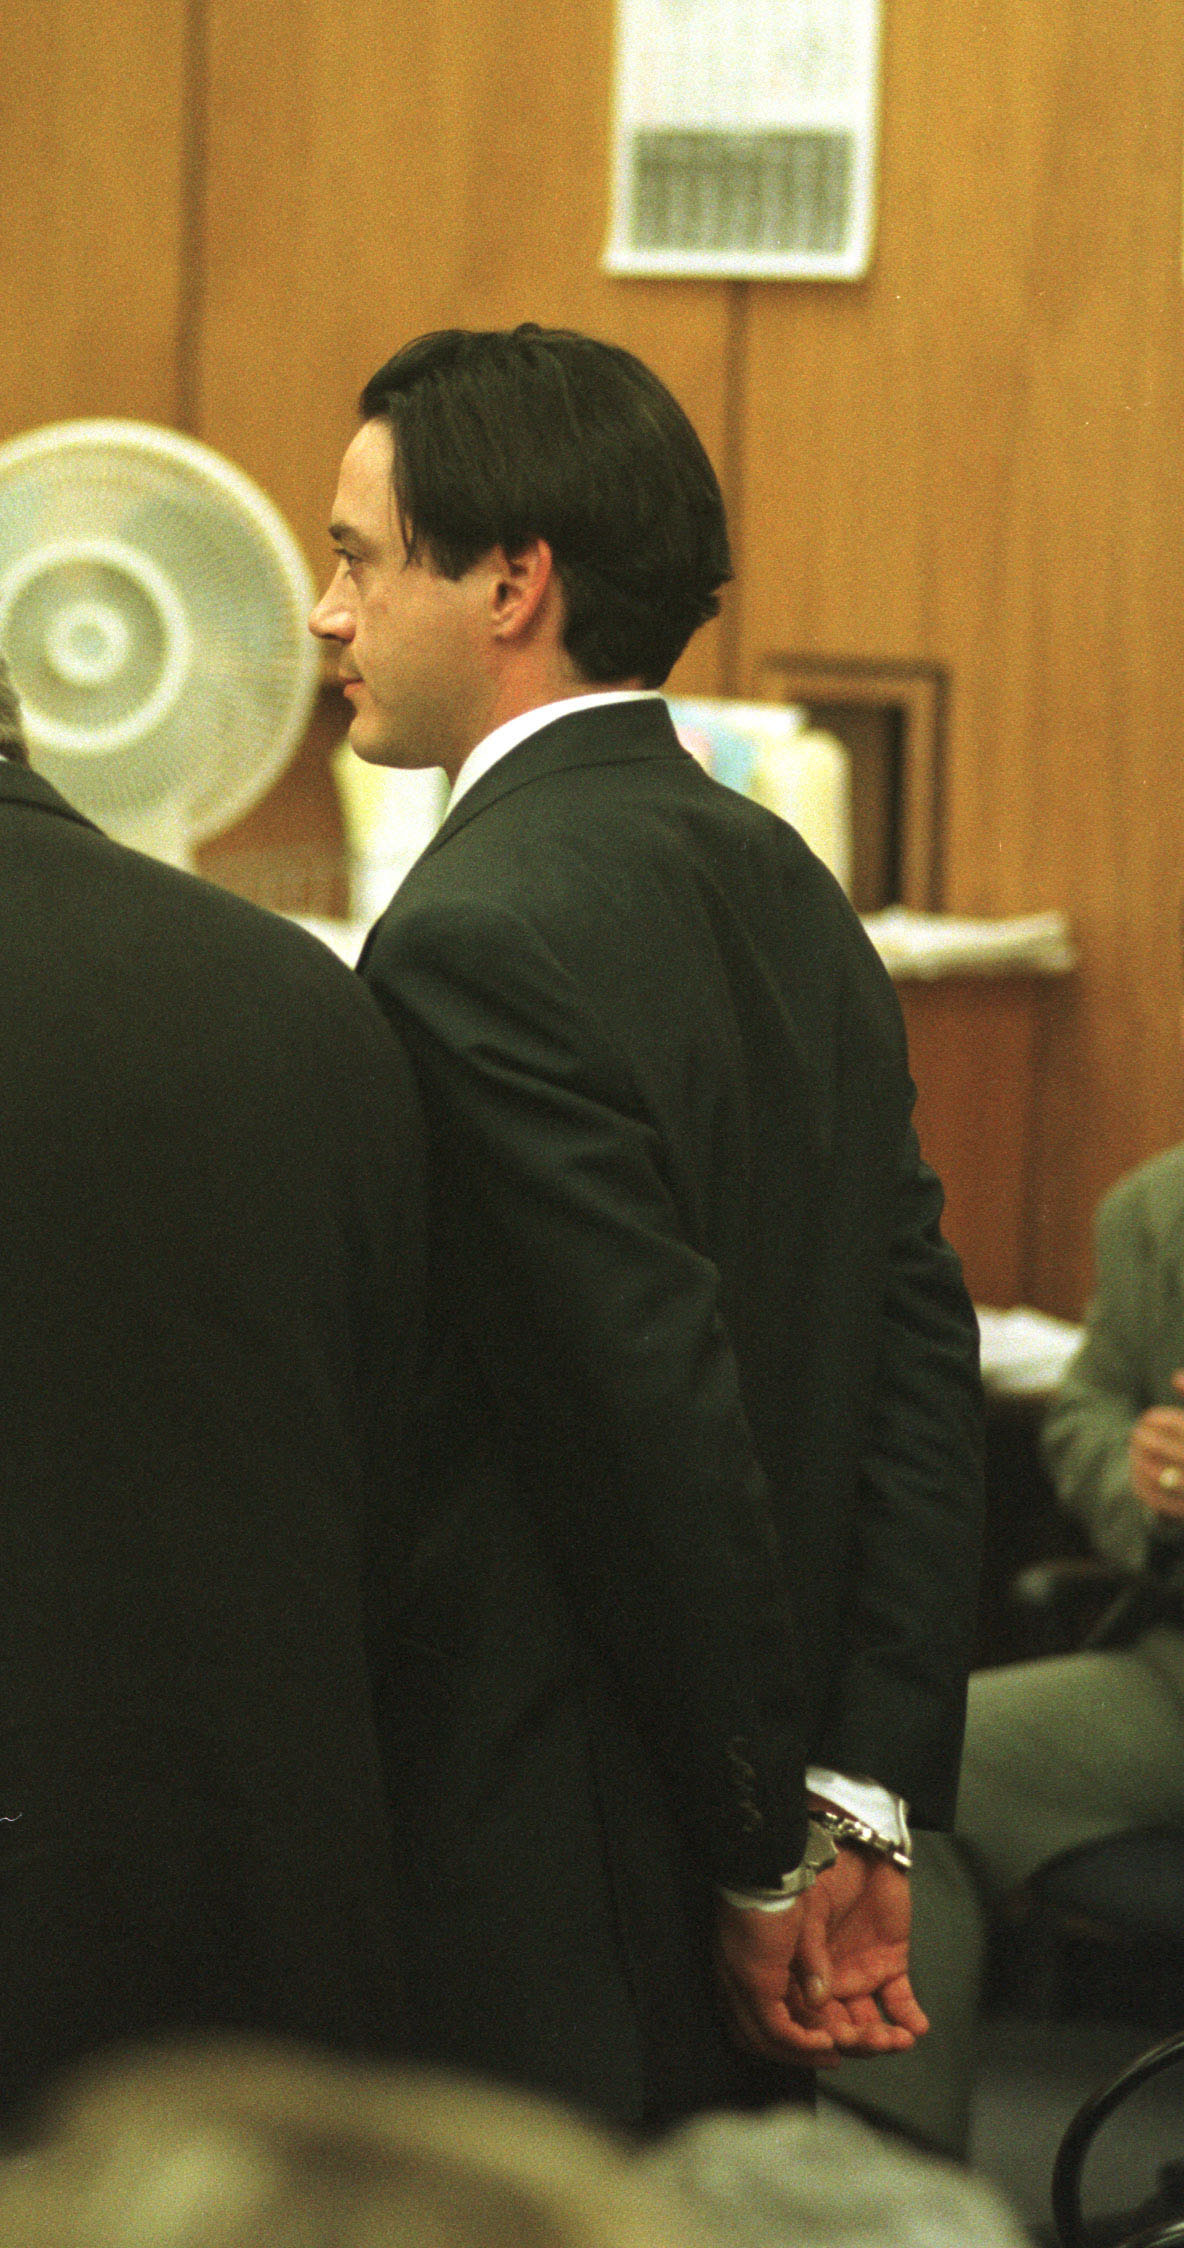 Robert Downey Jr. during his sentencing for possession of cocaine and speed on December 8, 1997 at a Malibu, California court room | Source: Getty Images